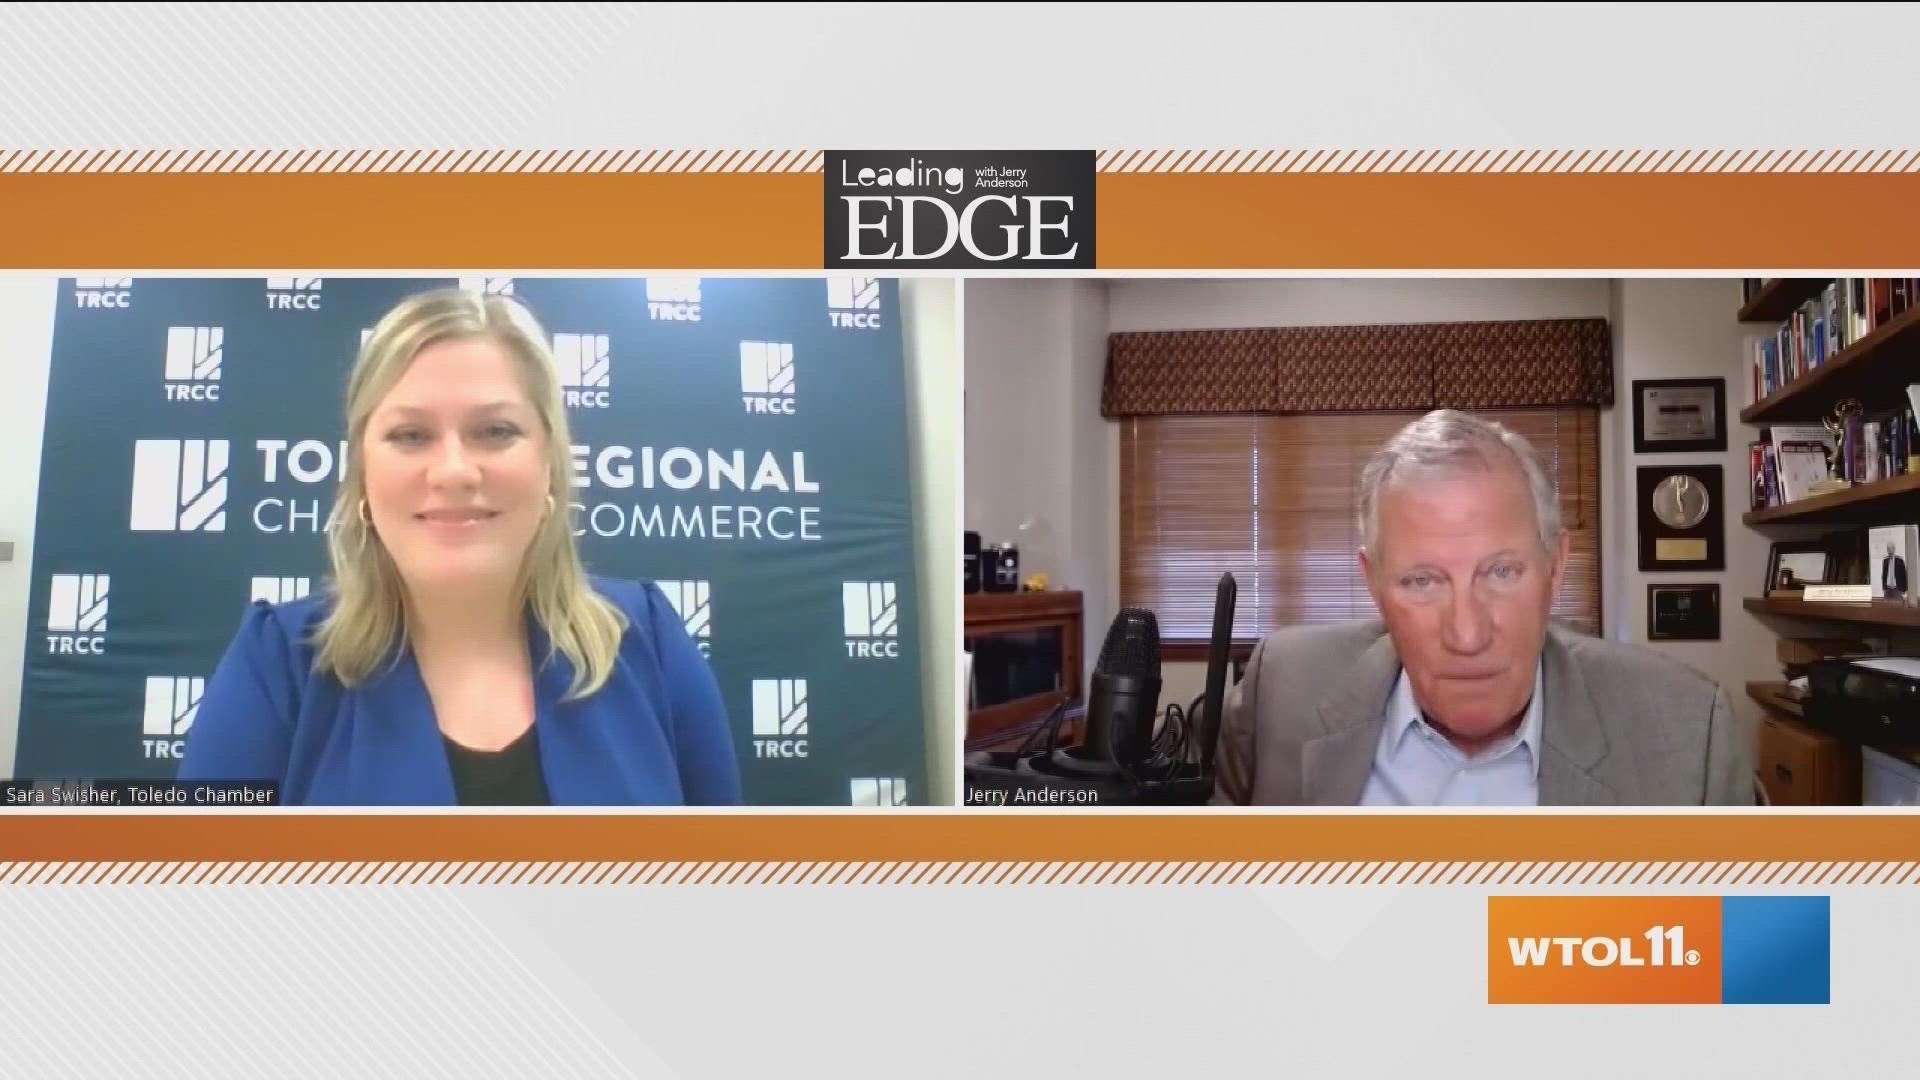 Sara Swisher, from EPIC Toledo and the Toledo Regional Chamber of Commerce, talks about retaining talent in the Toledo area for area businesses.